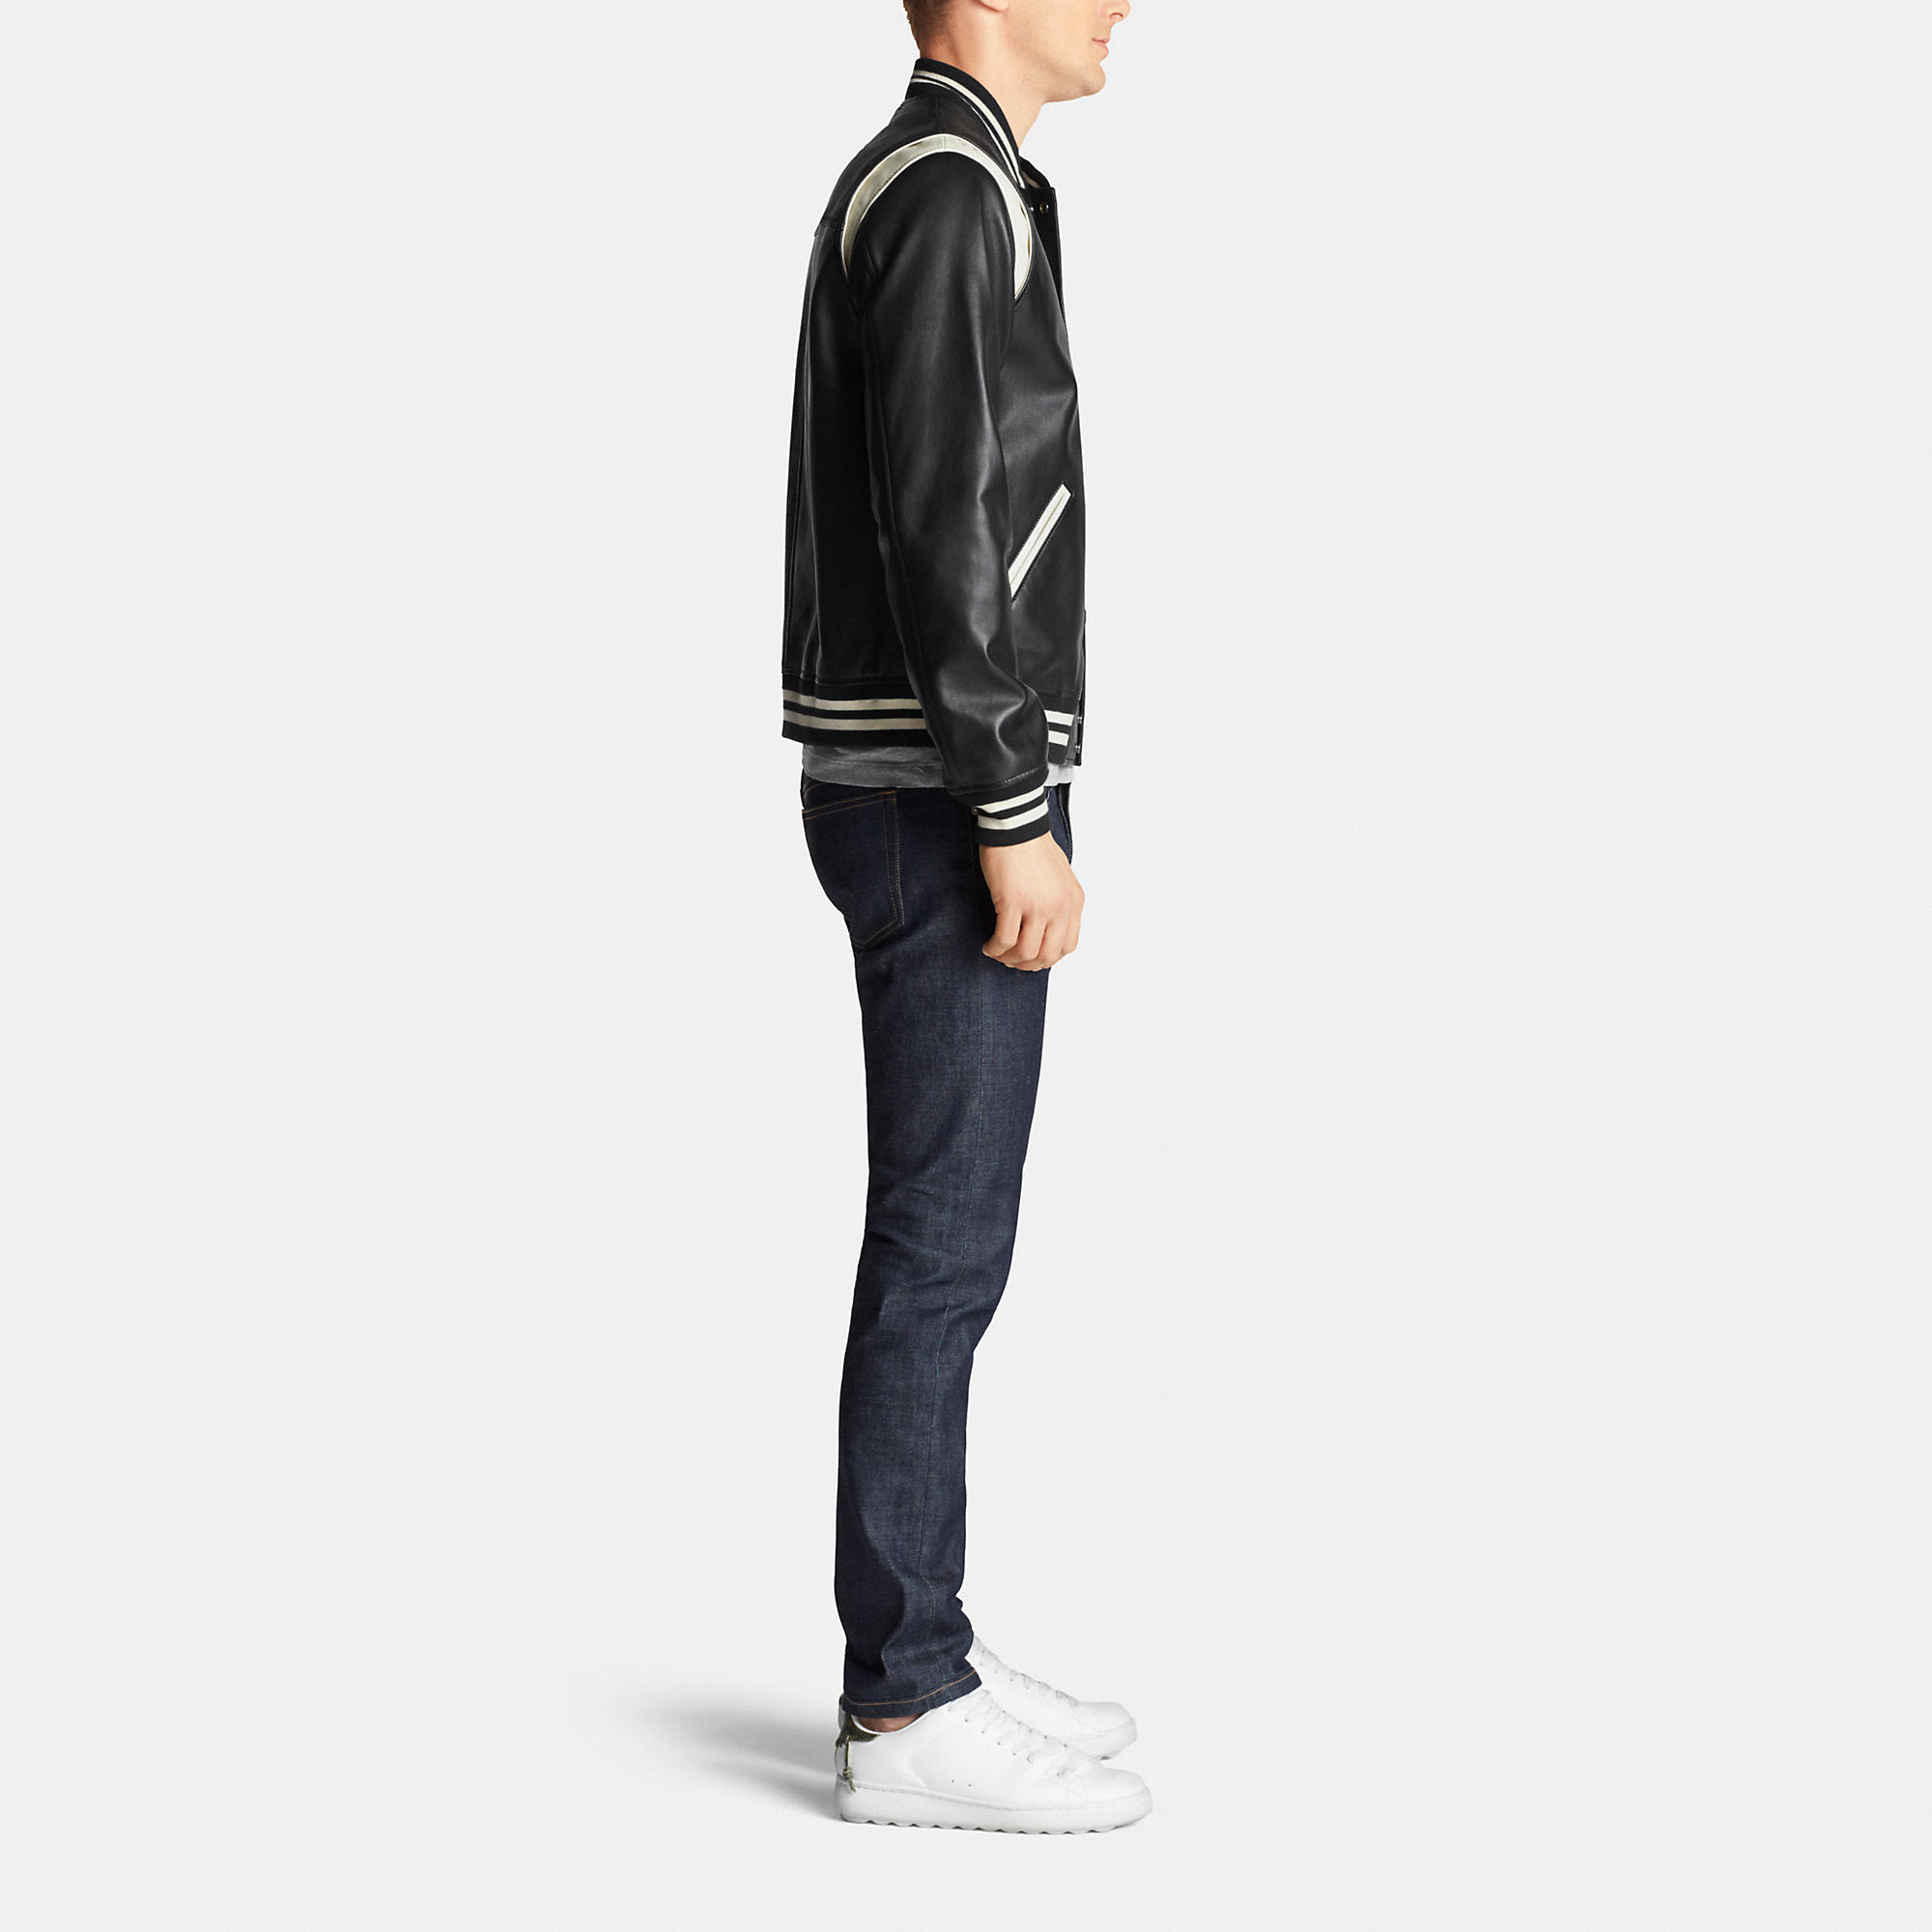 Lyst - Coach Leather Baseball Jacket in Black for Men